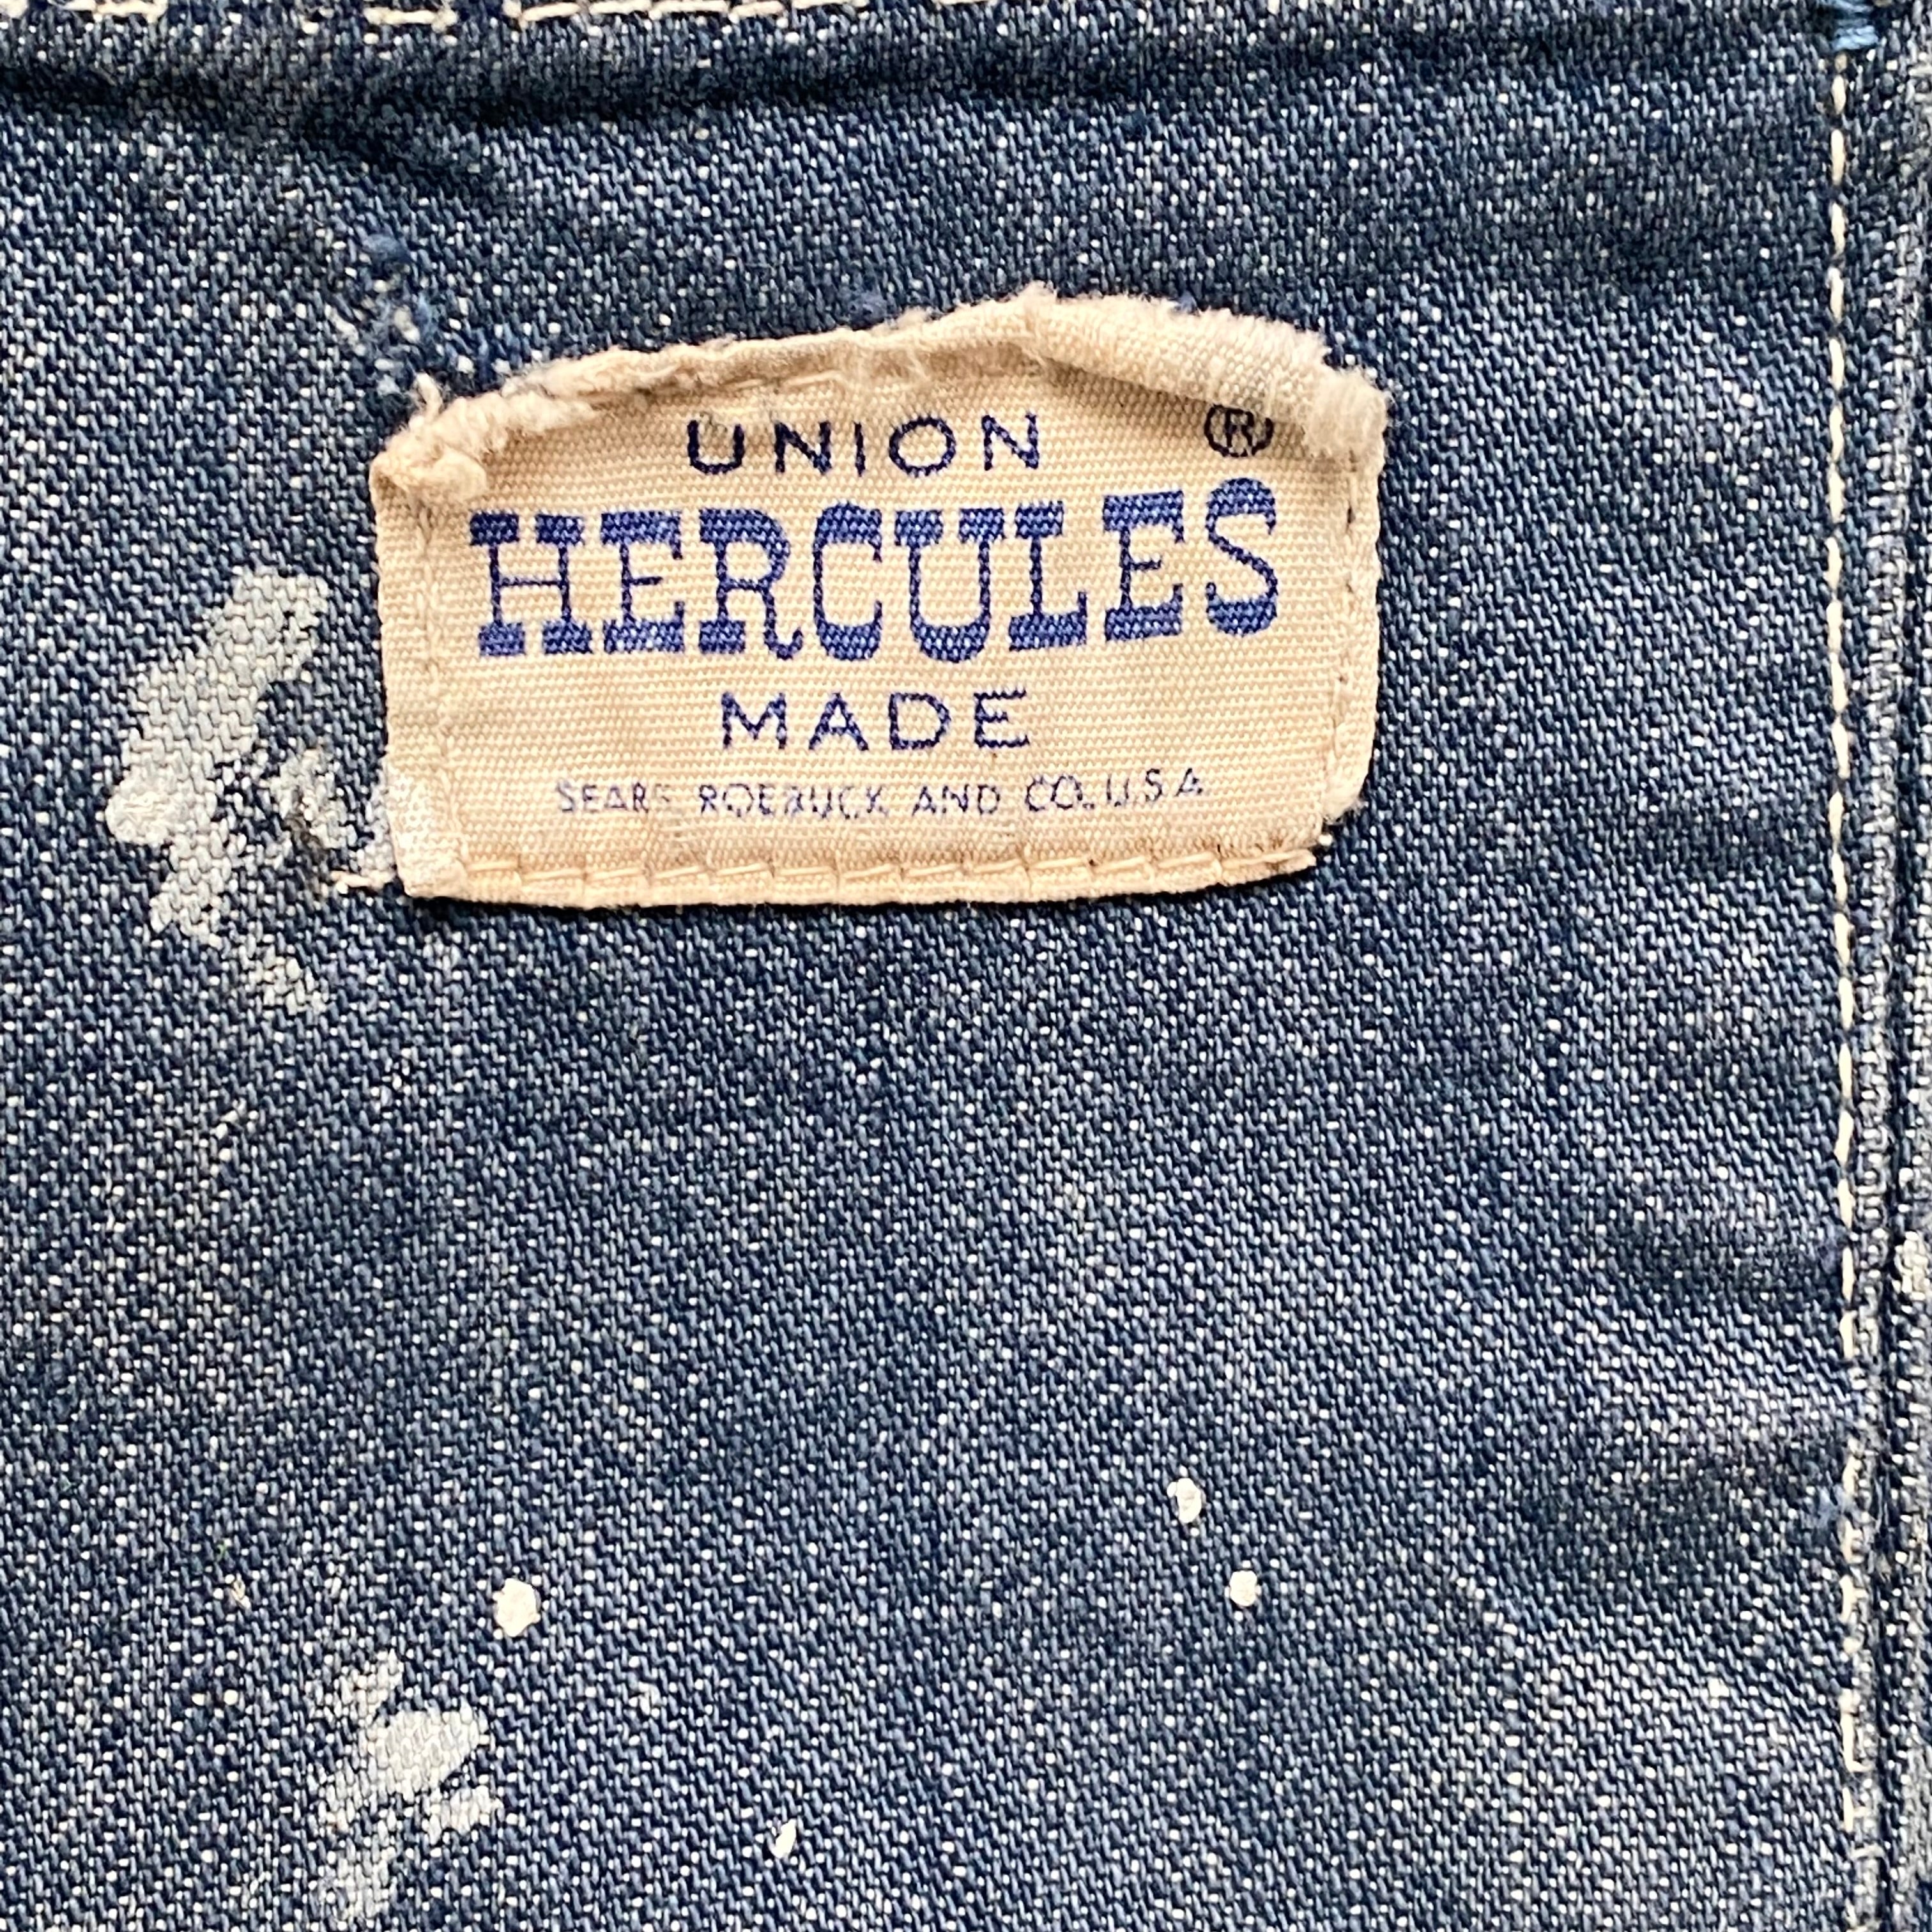 Sears, Jeans, Brand New Jeans Never Worn With Tags